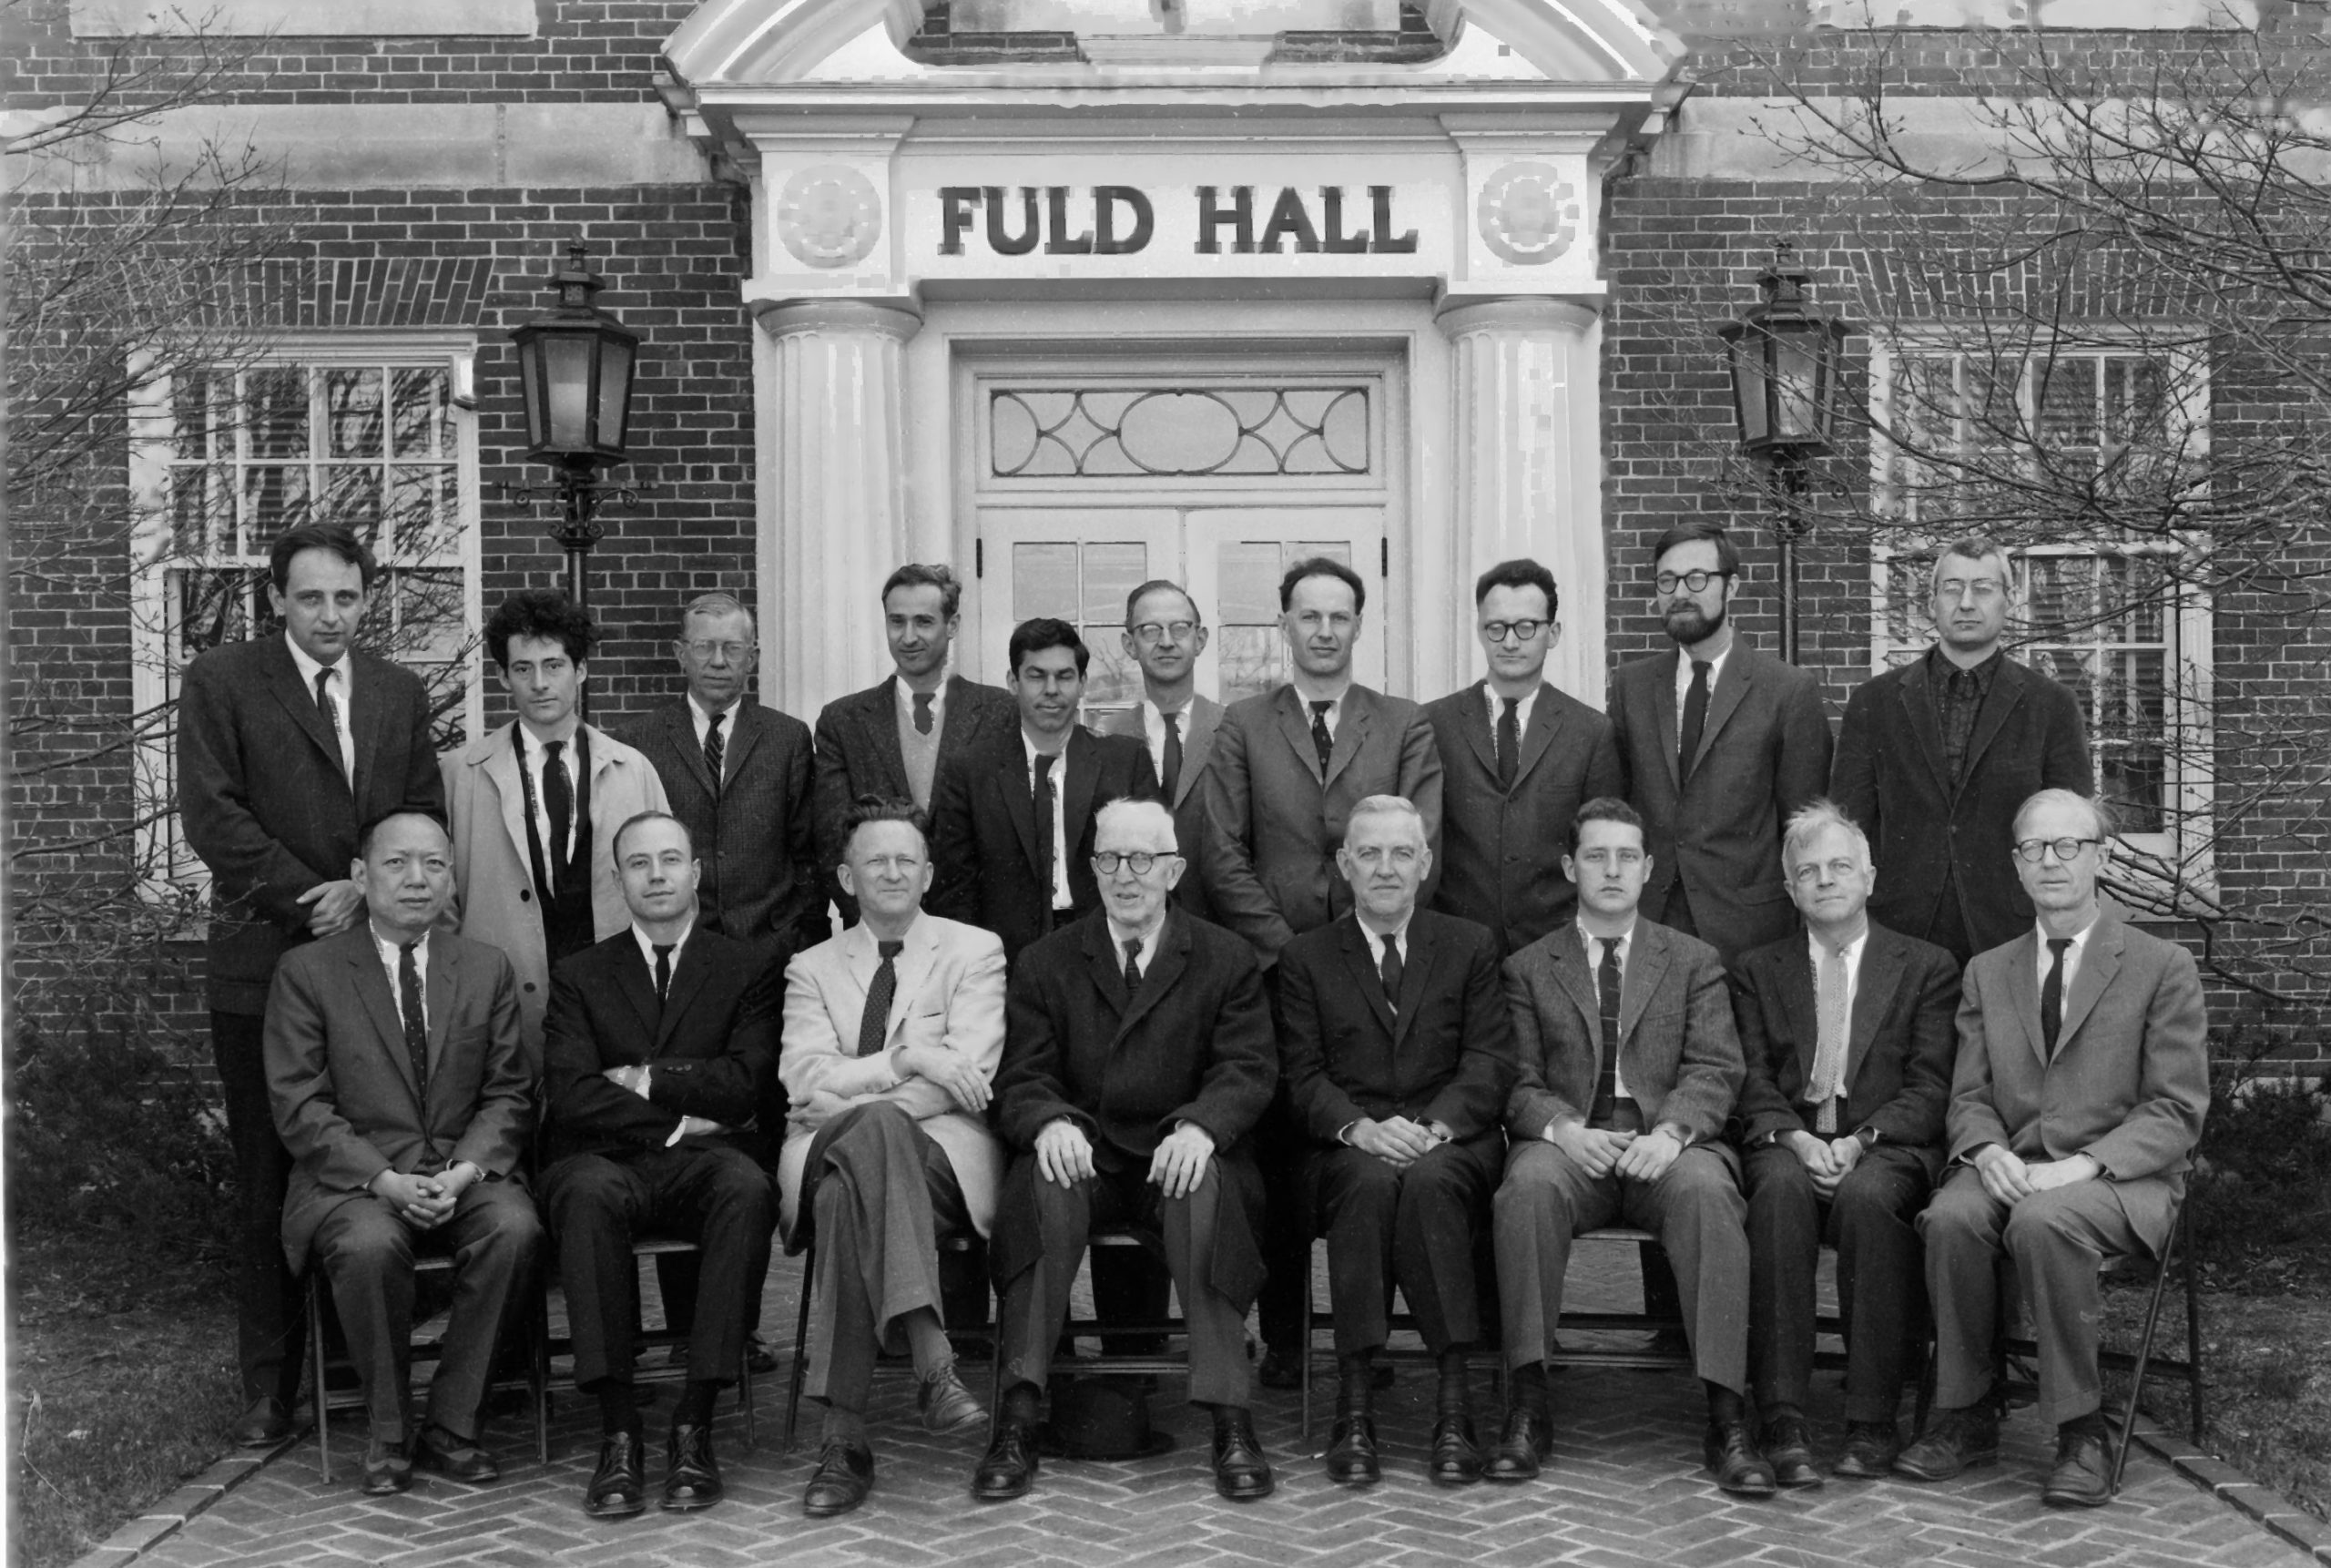 Symposium on Differential Topology, April 2-5, 1963 in at the Institute for Advanced Study in Princeton, a conference in the honoor of Marston Morse: Left to right top: Bott, Raoul, 1923-2005, Mazur, Barry Hedlund, Gustav Arnold, 1904- Frankel, Theodore, 1929- Smale, Stephen, 1930- Kuiper, Nicolaas Hendrik Adams, John Frank Browder, William Milnor, John Willard, 1931- Kervaire, Michel A.  Chern, Shiing-Shen, 1911-2004 Pohrer, Robert G.  Selberg, Atle Morse, Marston, 1892-1977 Leighton, Walter, 1907- Hirsch, Morris W., 1933- Cairns, Stewart Scott, Whitney, Hassler
